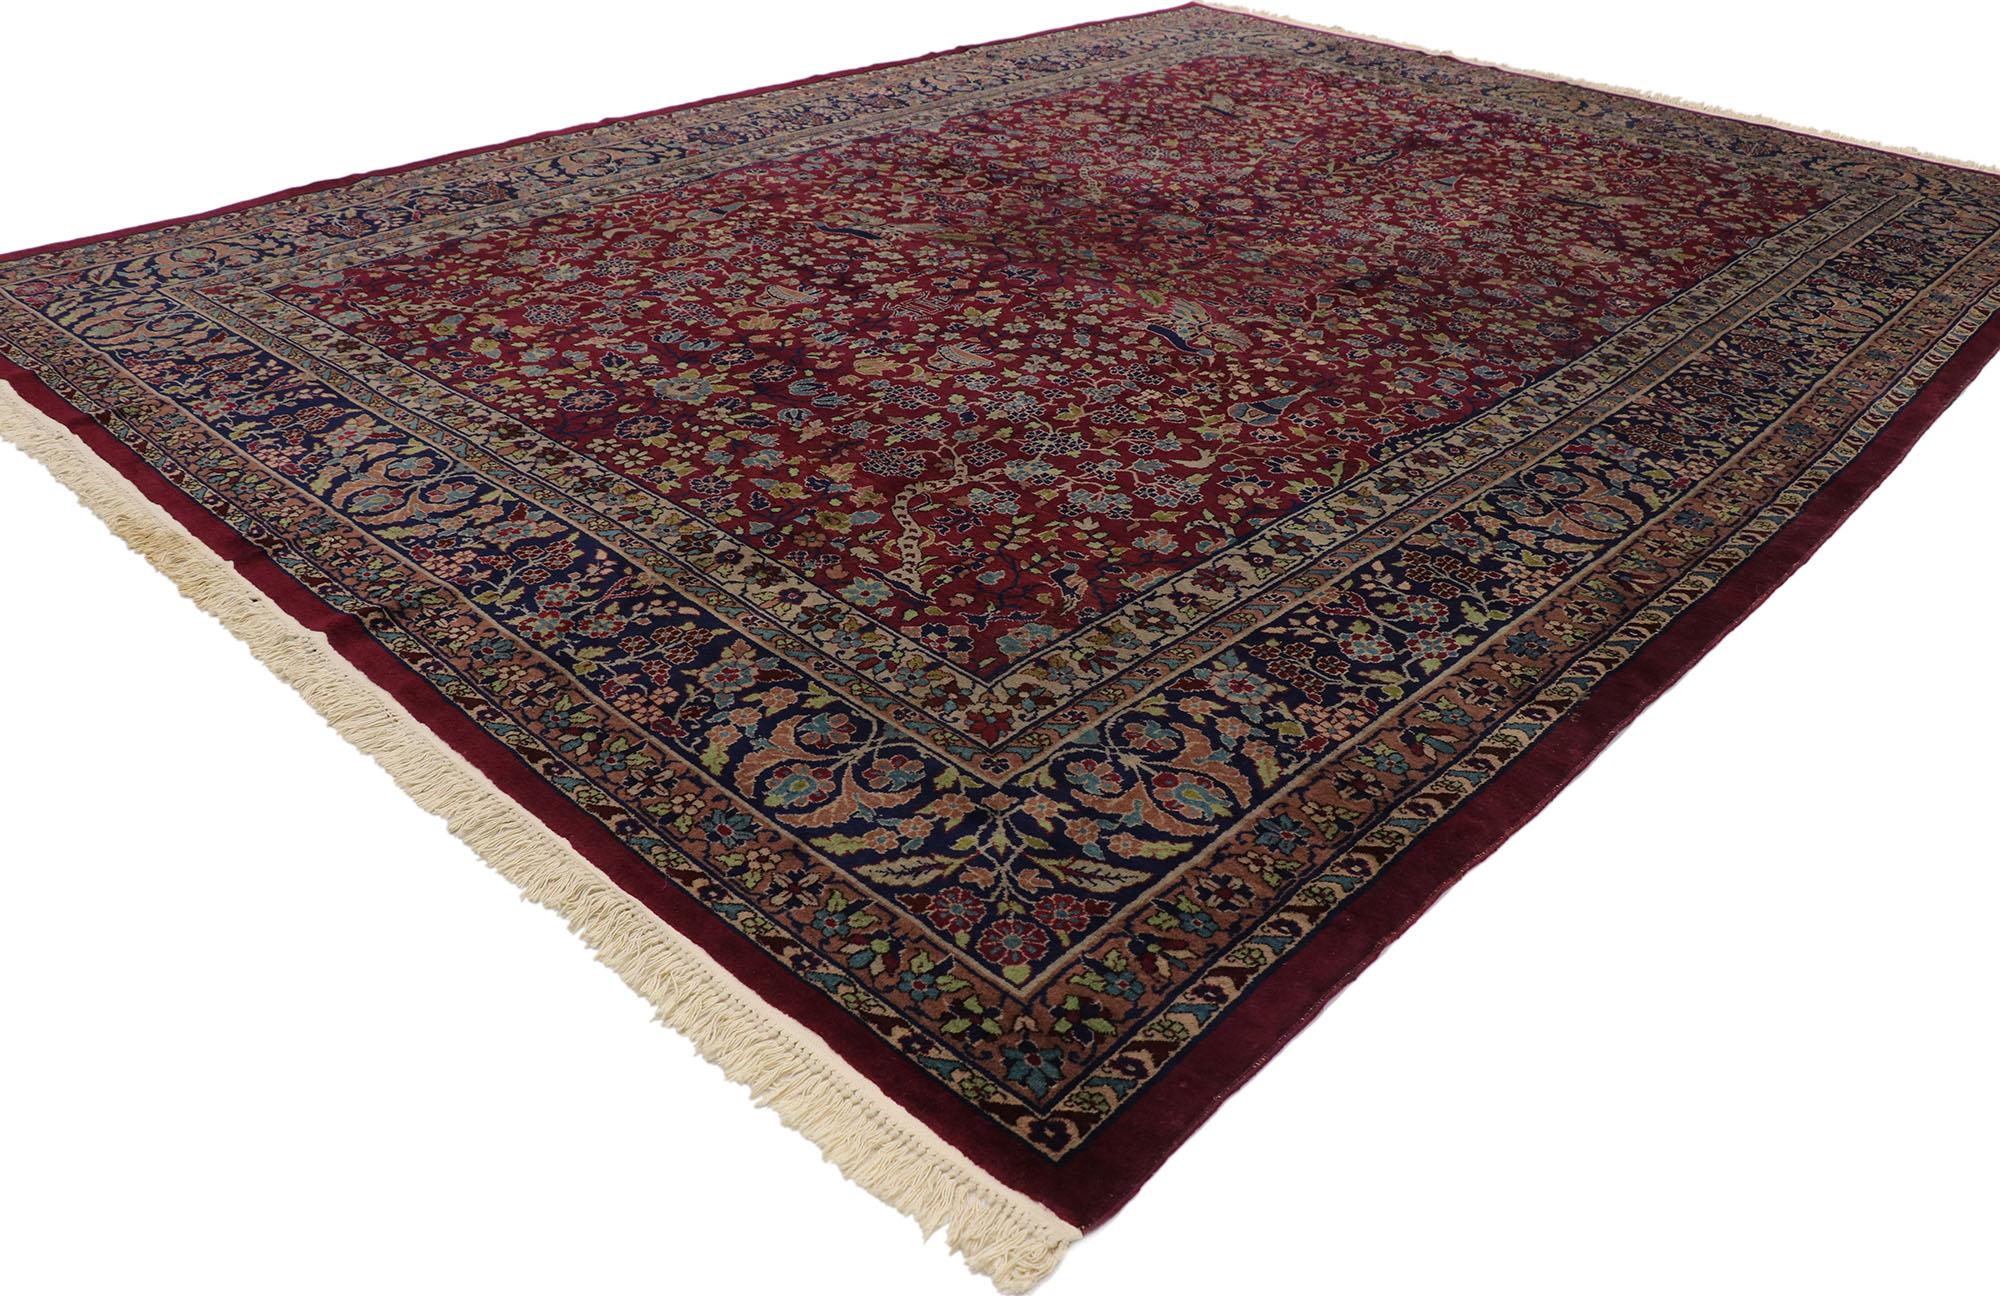 77541, antique Indian Agra rug with Victorian Renaissance style. Rich in color with beguiling beauty, this hand knotted wool antique Indian Agra rug beautifully embodies Victorian Renaissance style. The abrashed burgundy maroon field is covered in